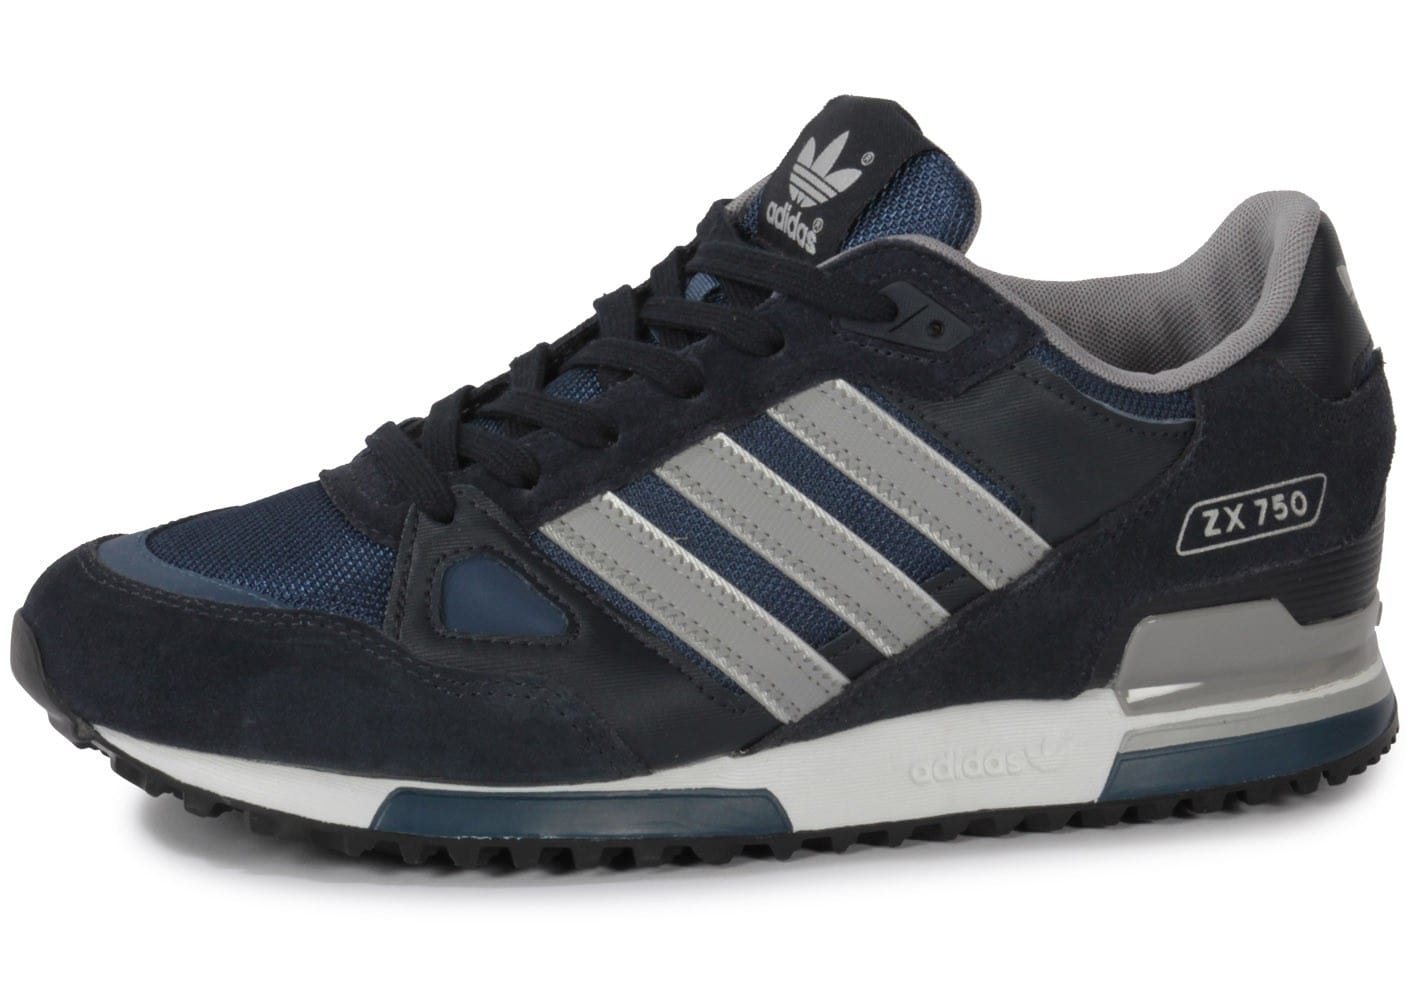 adidas zx 750 homme or